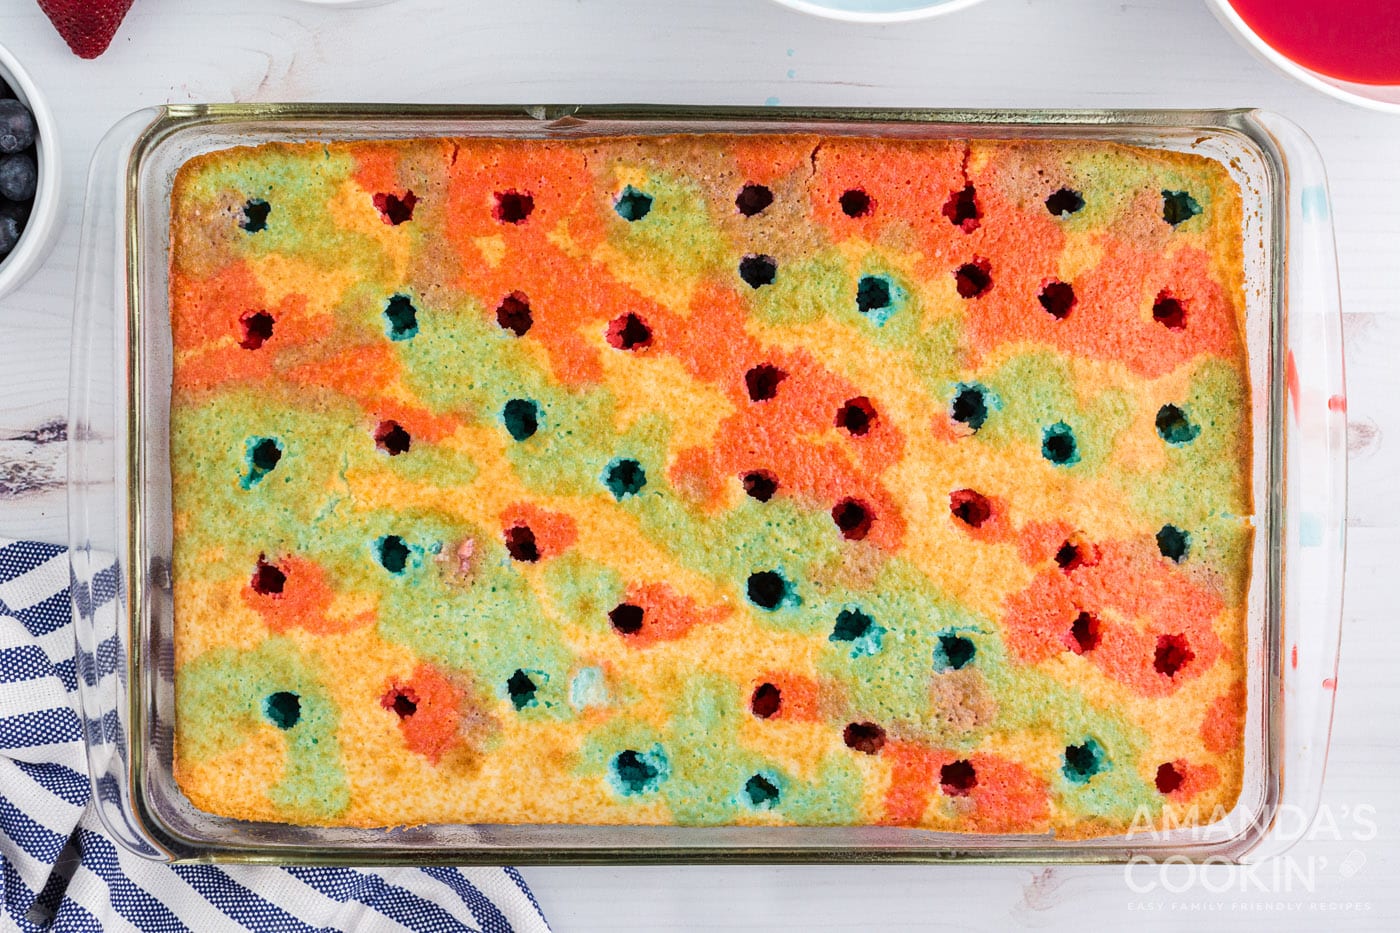 blue and red jello over the top of a white cake mix with holes